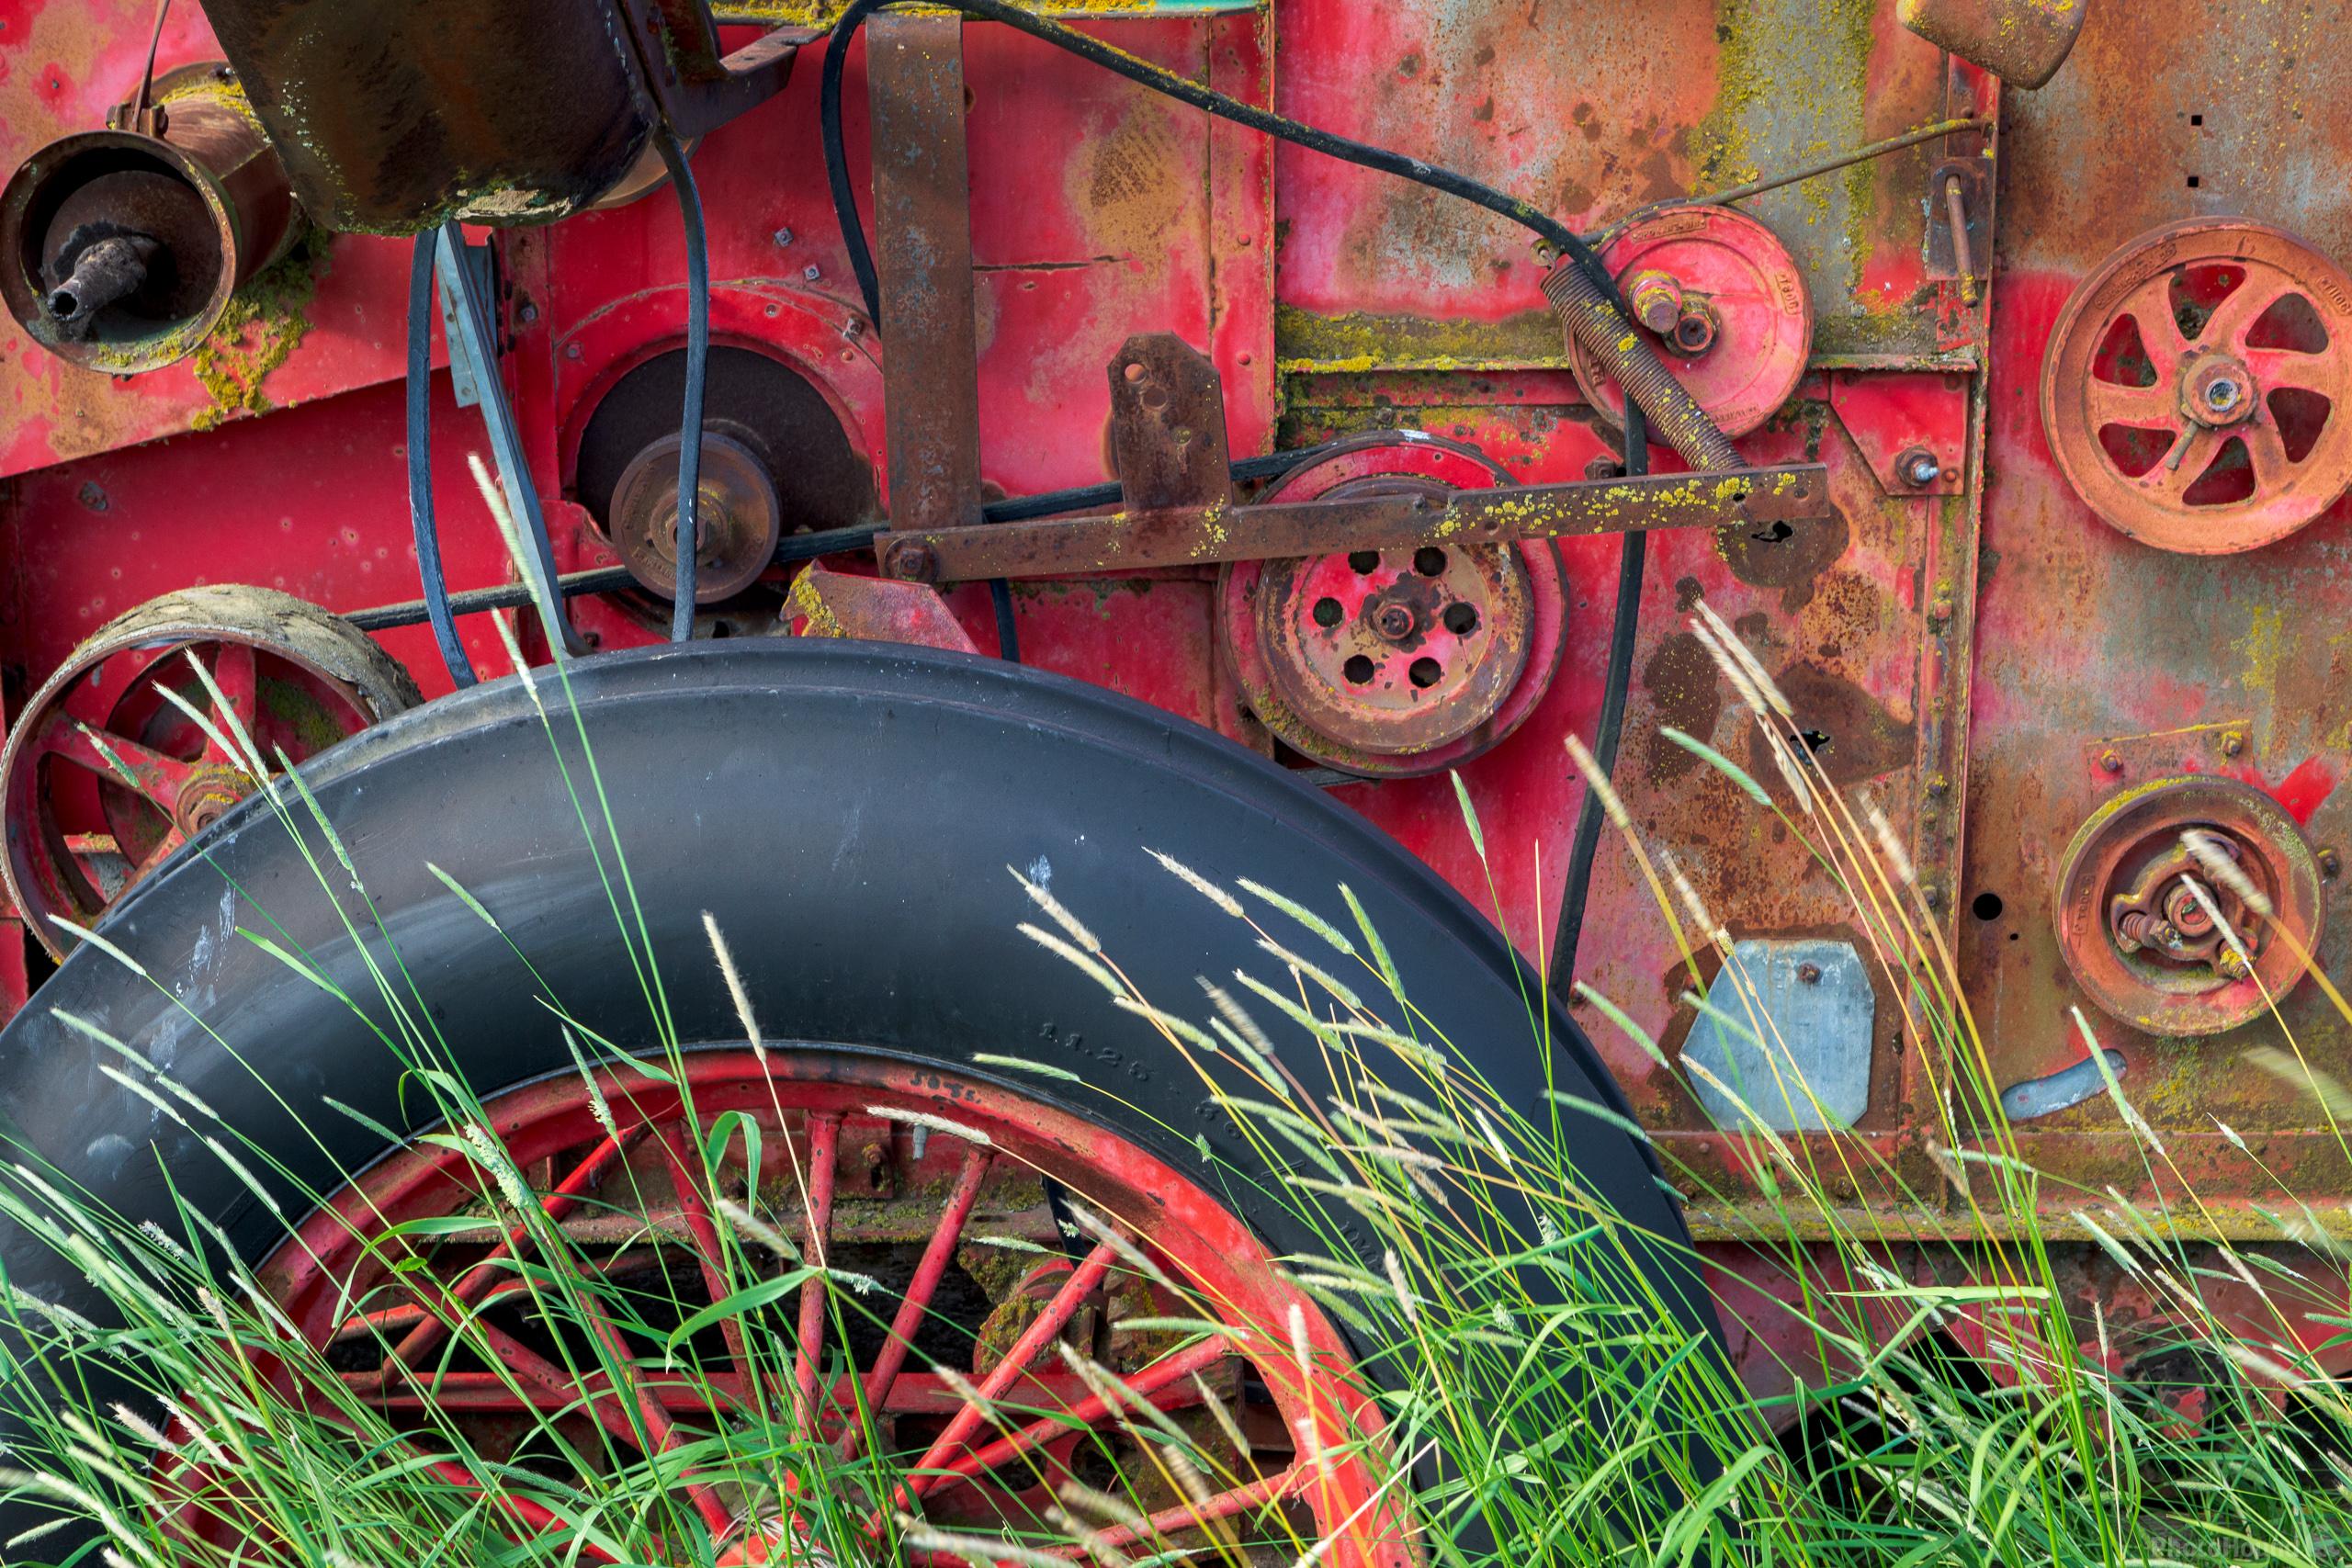 Image of Borgen Road Old Machinery by Joe Becker